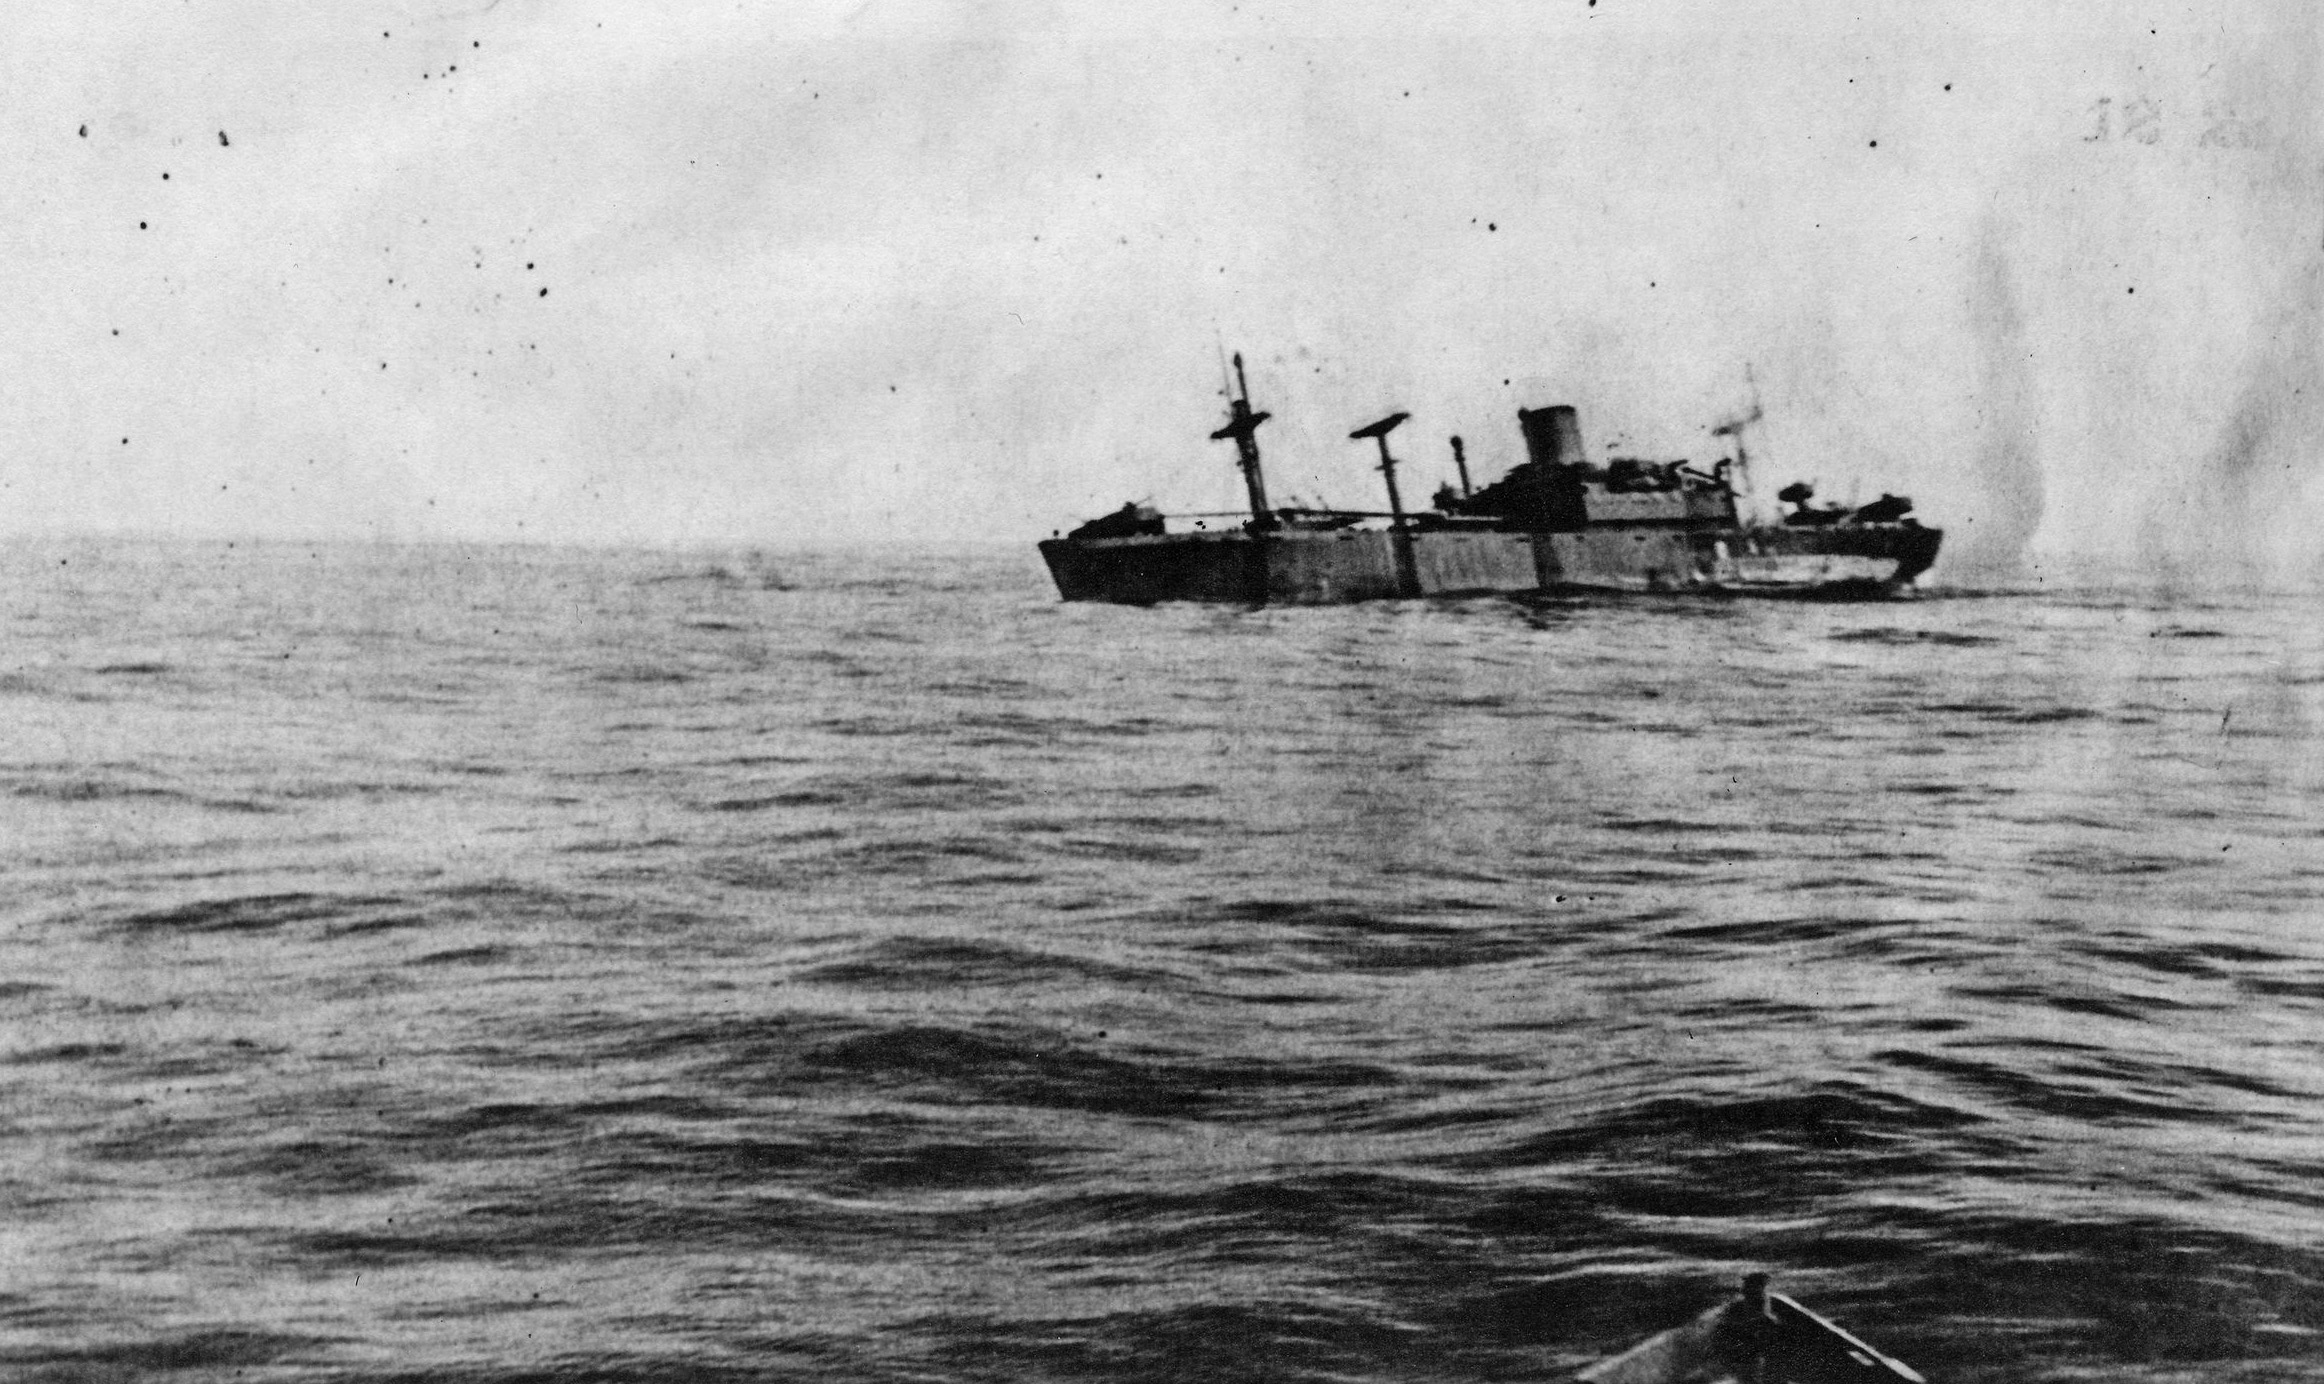 Photographed the day after it was attacked by the Japanese submarine I-21, the troopship SS Cape San Juan lists sharply to port. Soon after this photo was taken, the ship slipped beneath the waves.